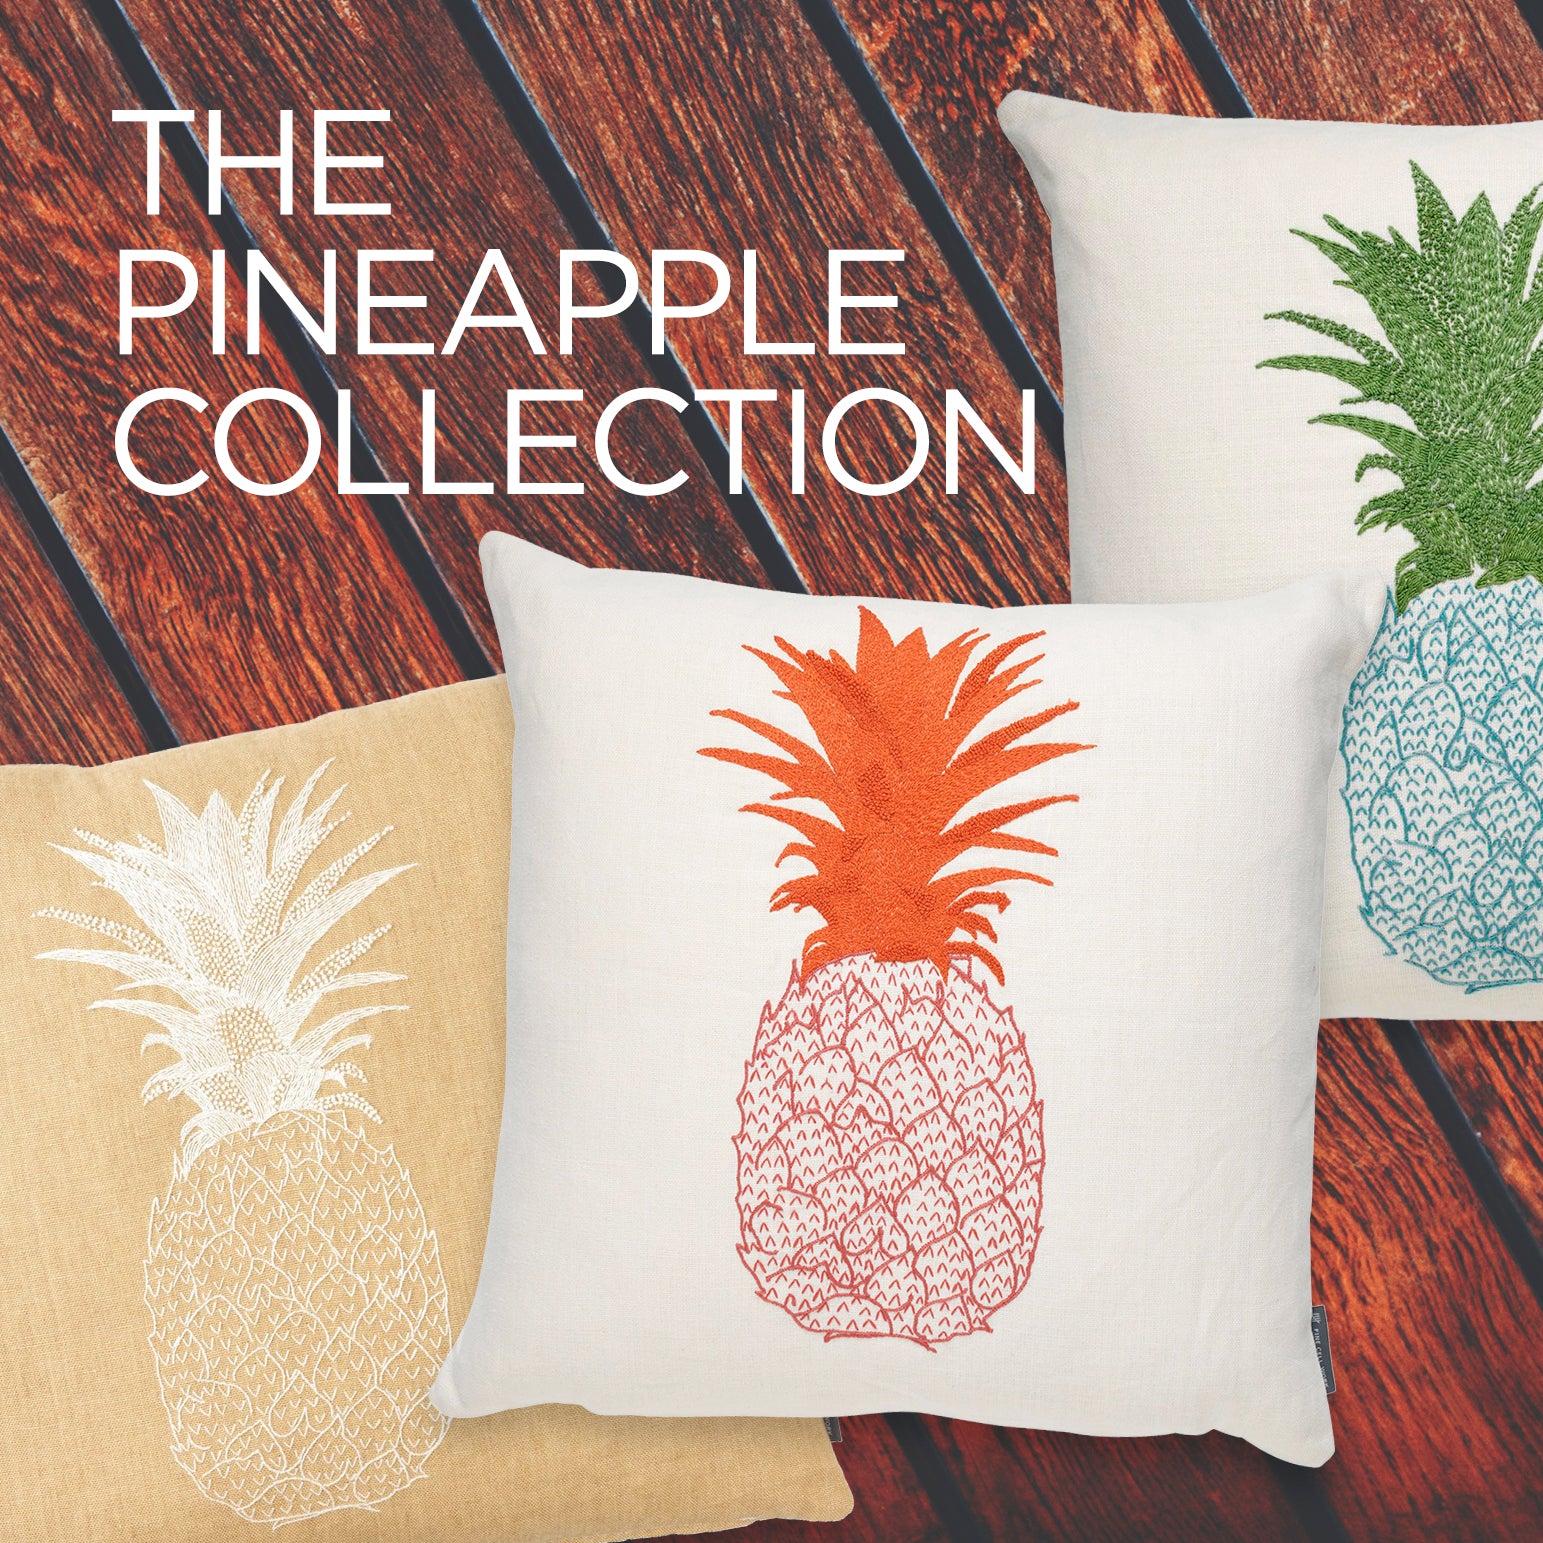 Pineapple Hand-Embroidered Cushion Blue and Green on Cream Linen Melissa Wyndham for Fine Cell Work